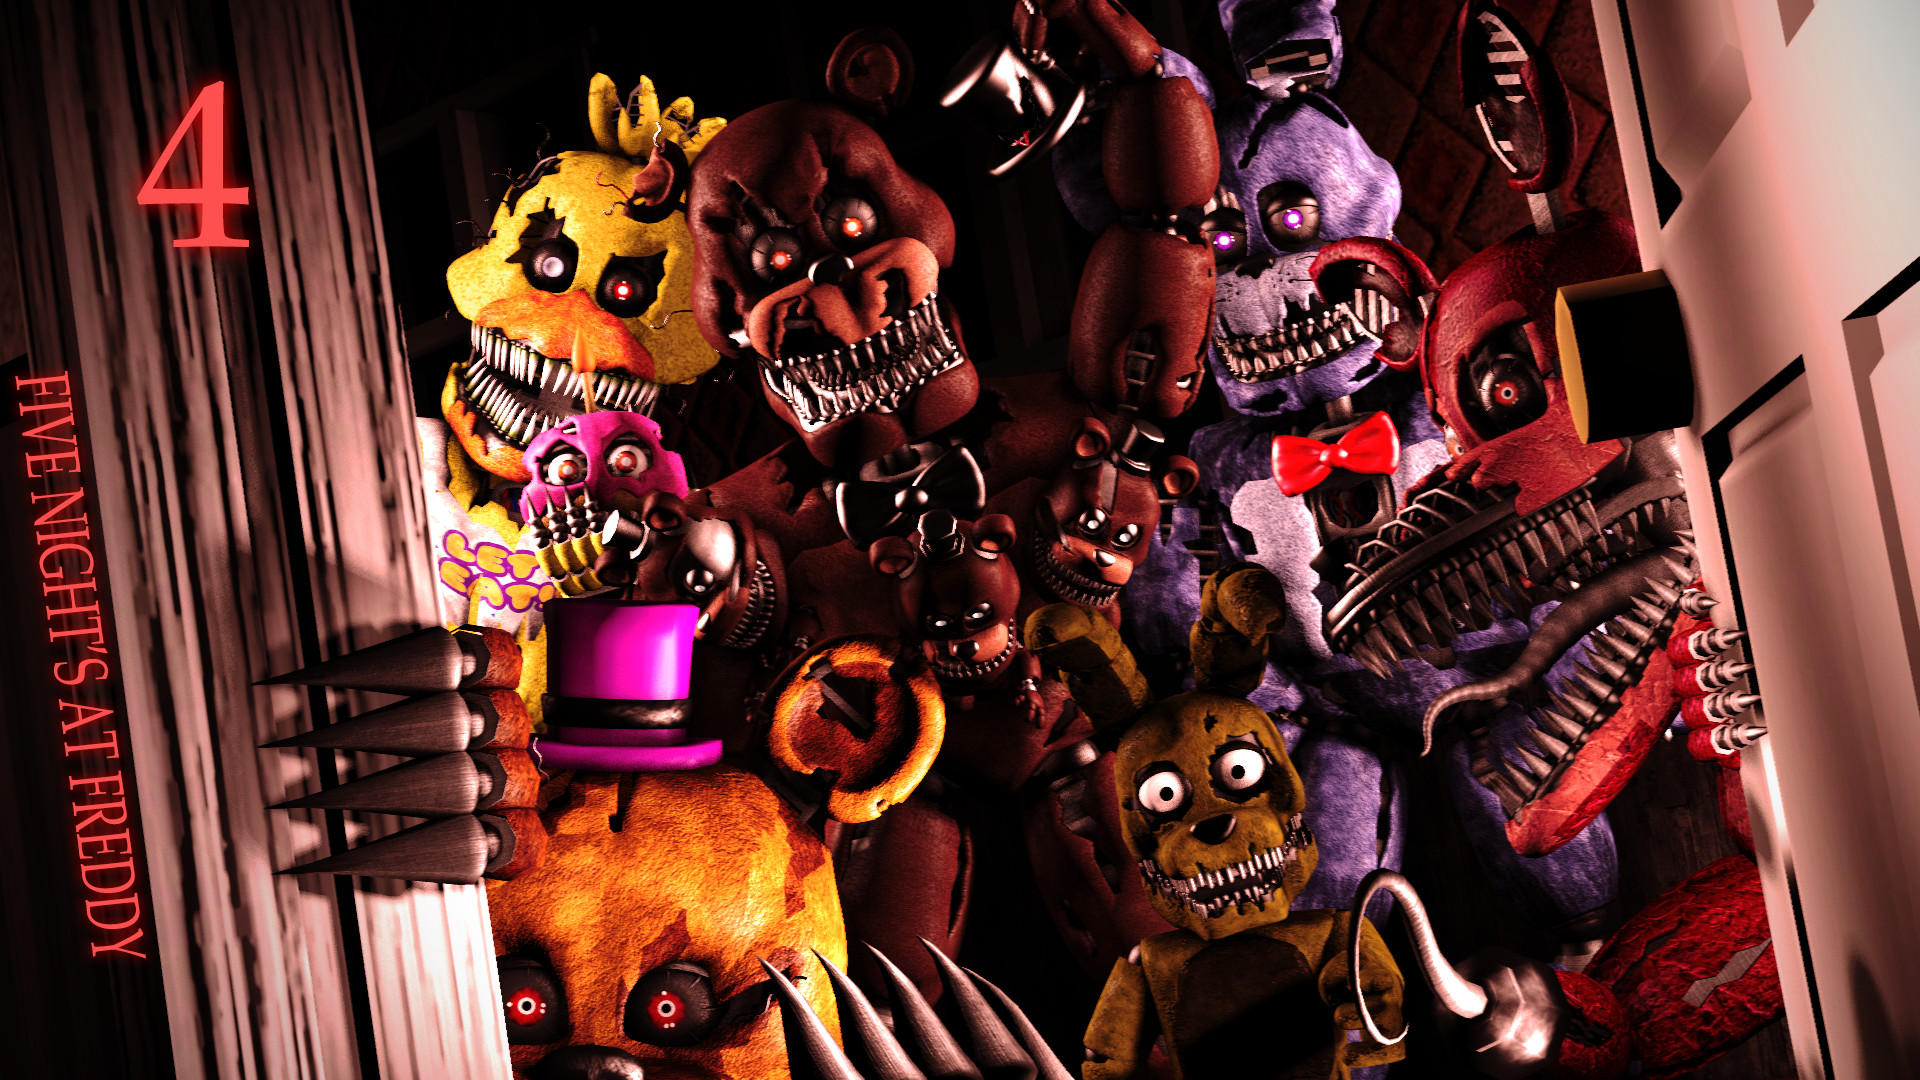 Five Nights at Freddys 4 2015 PC Game Free Download - Free Games Download 1...